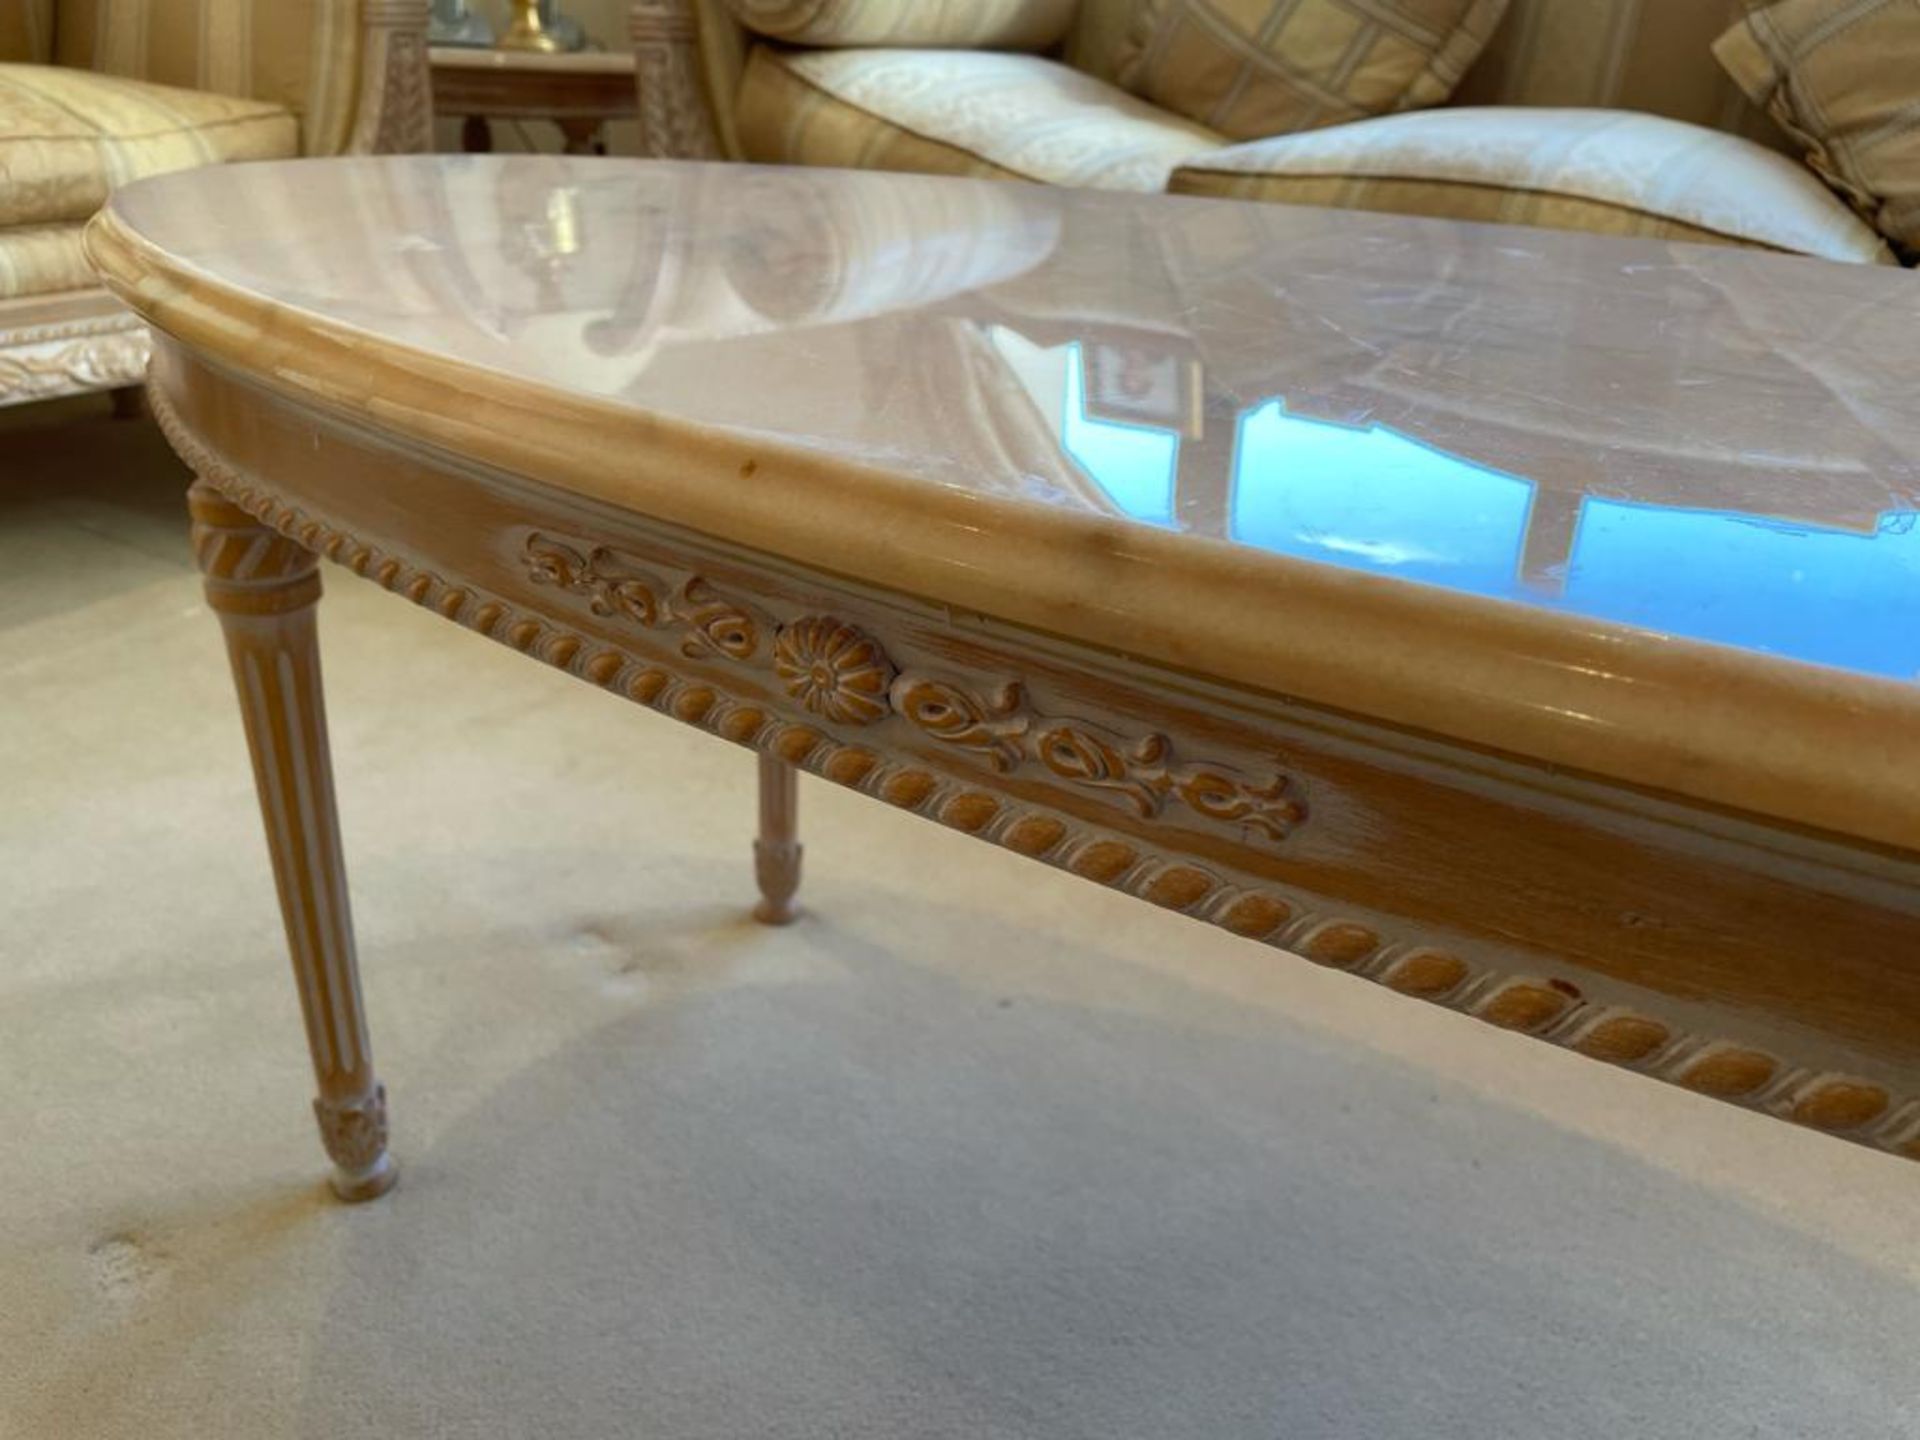 1 x French Shabby Chic Oval Coffee Table With Marble Top and Ornate Carved Base - Size: H50 x W118 x - Image 3 of 12